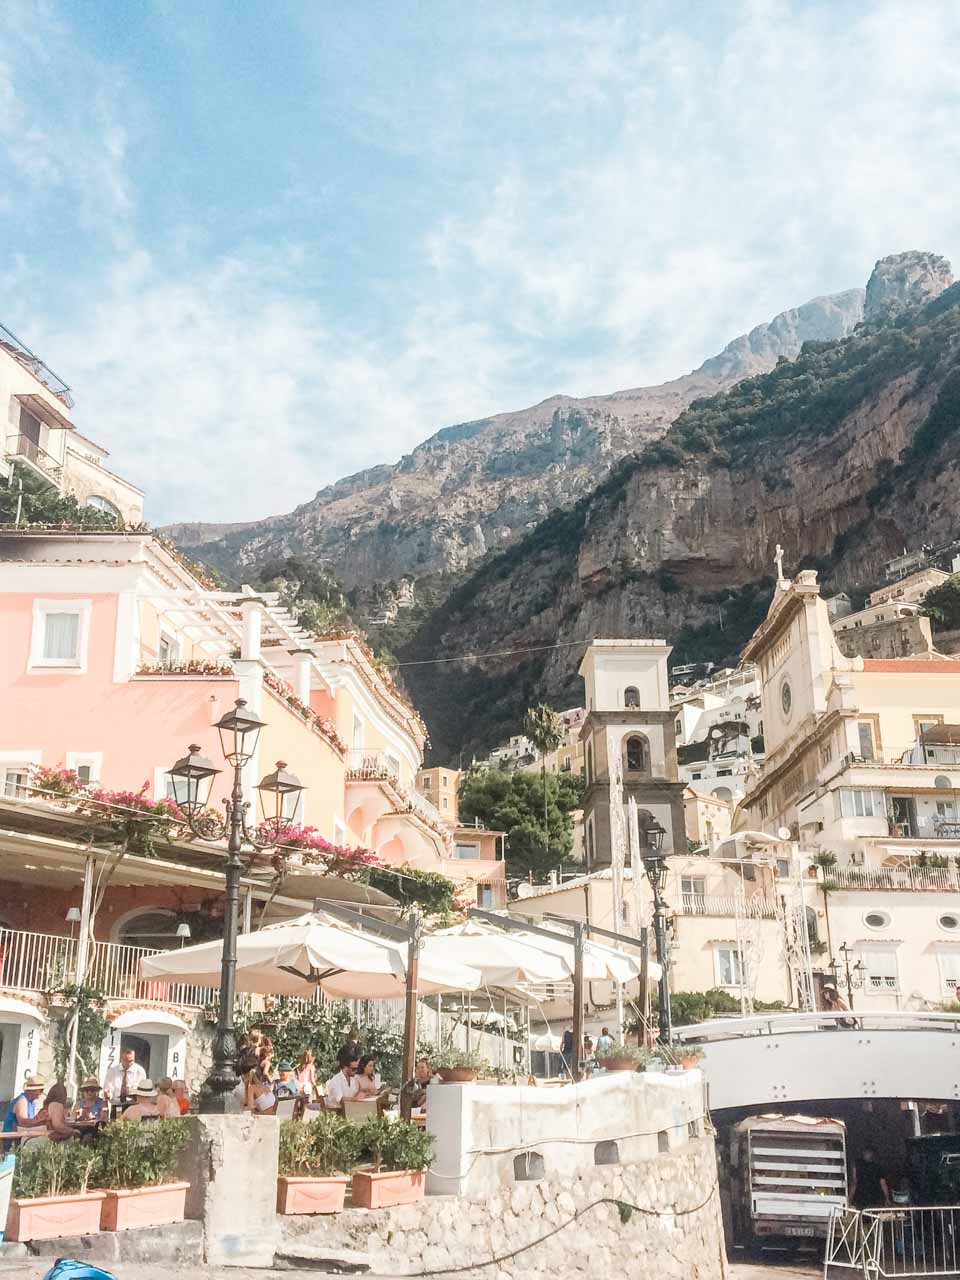 A view of Positano, Italy from the harbour